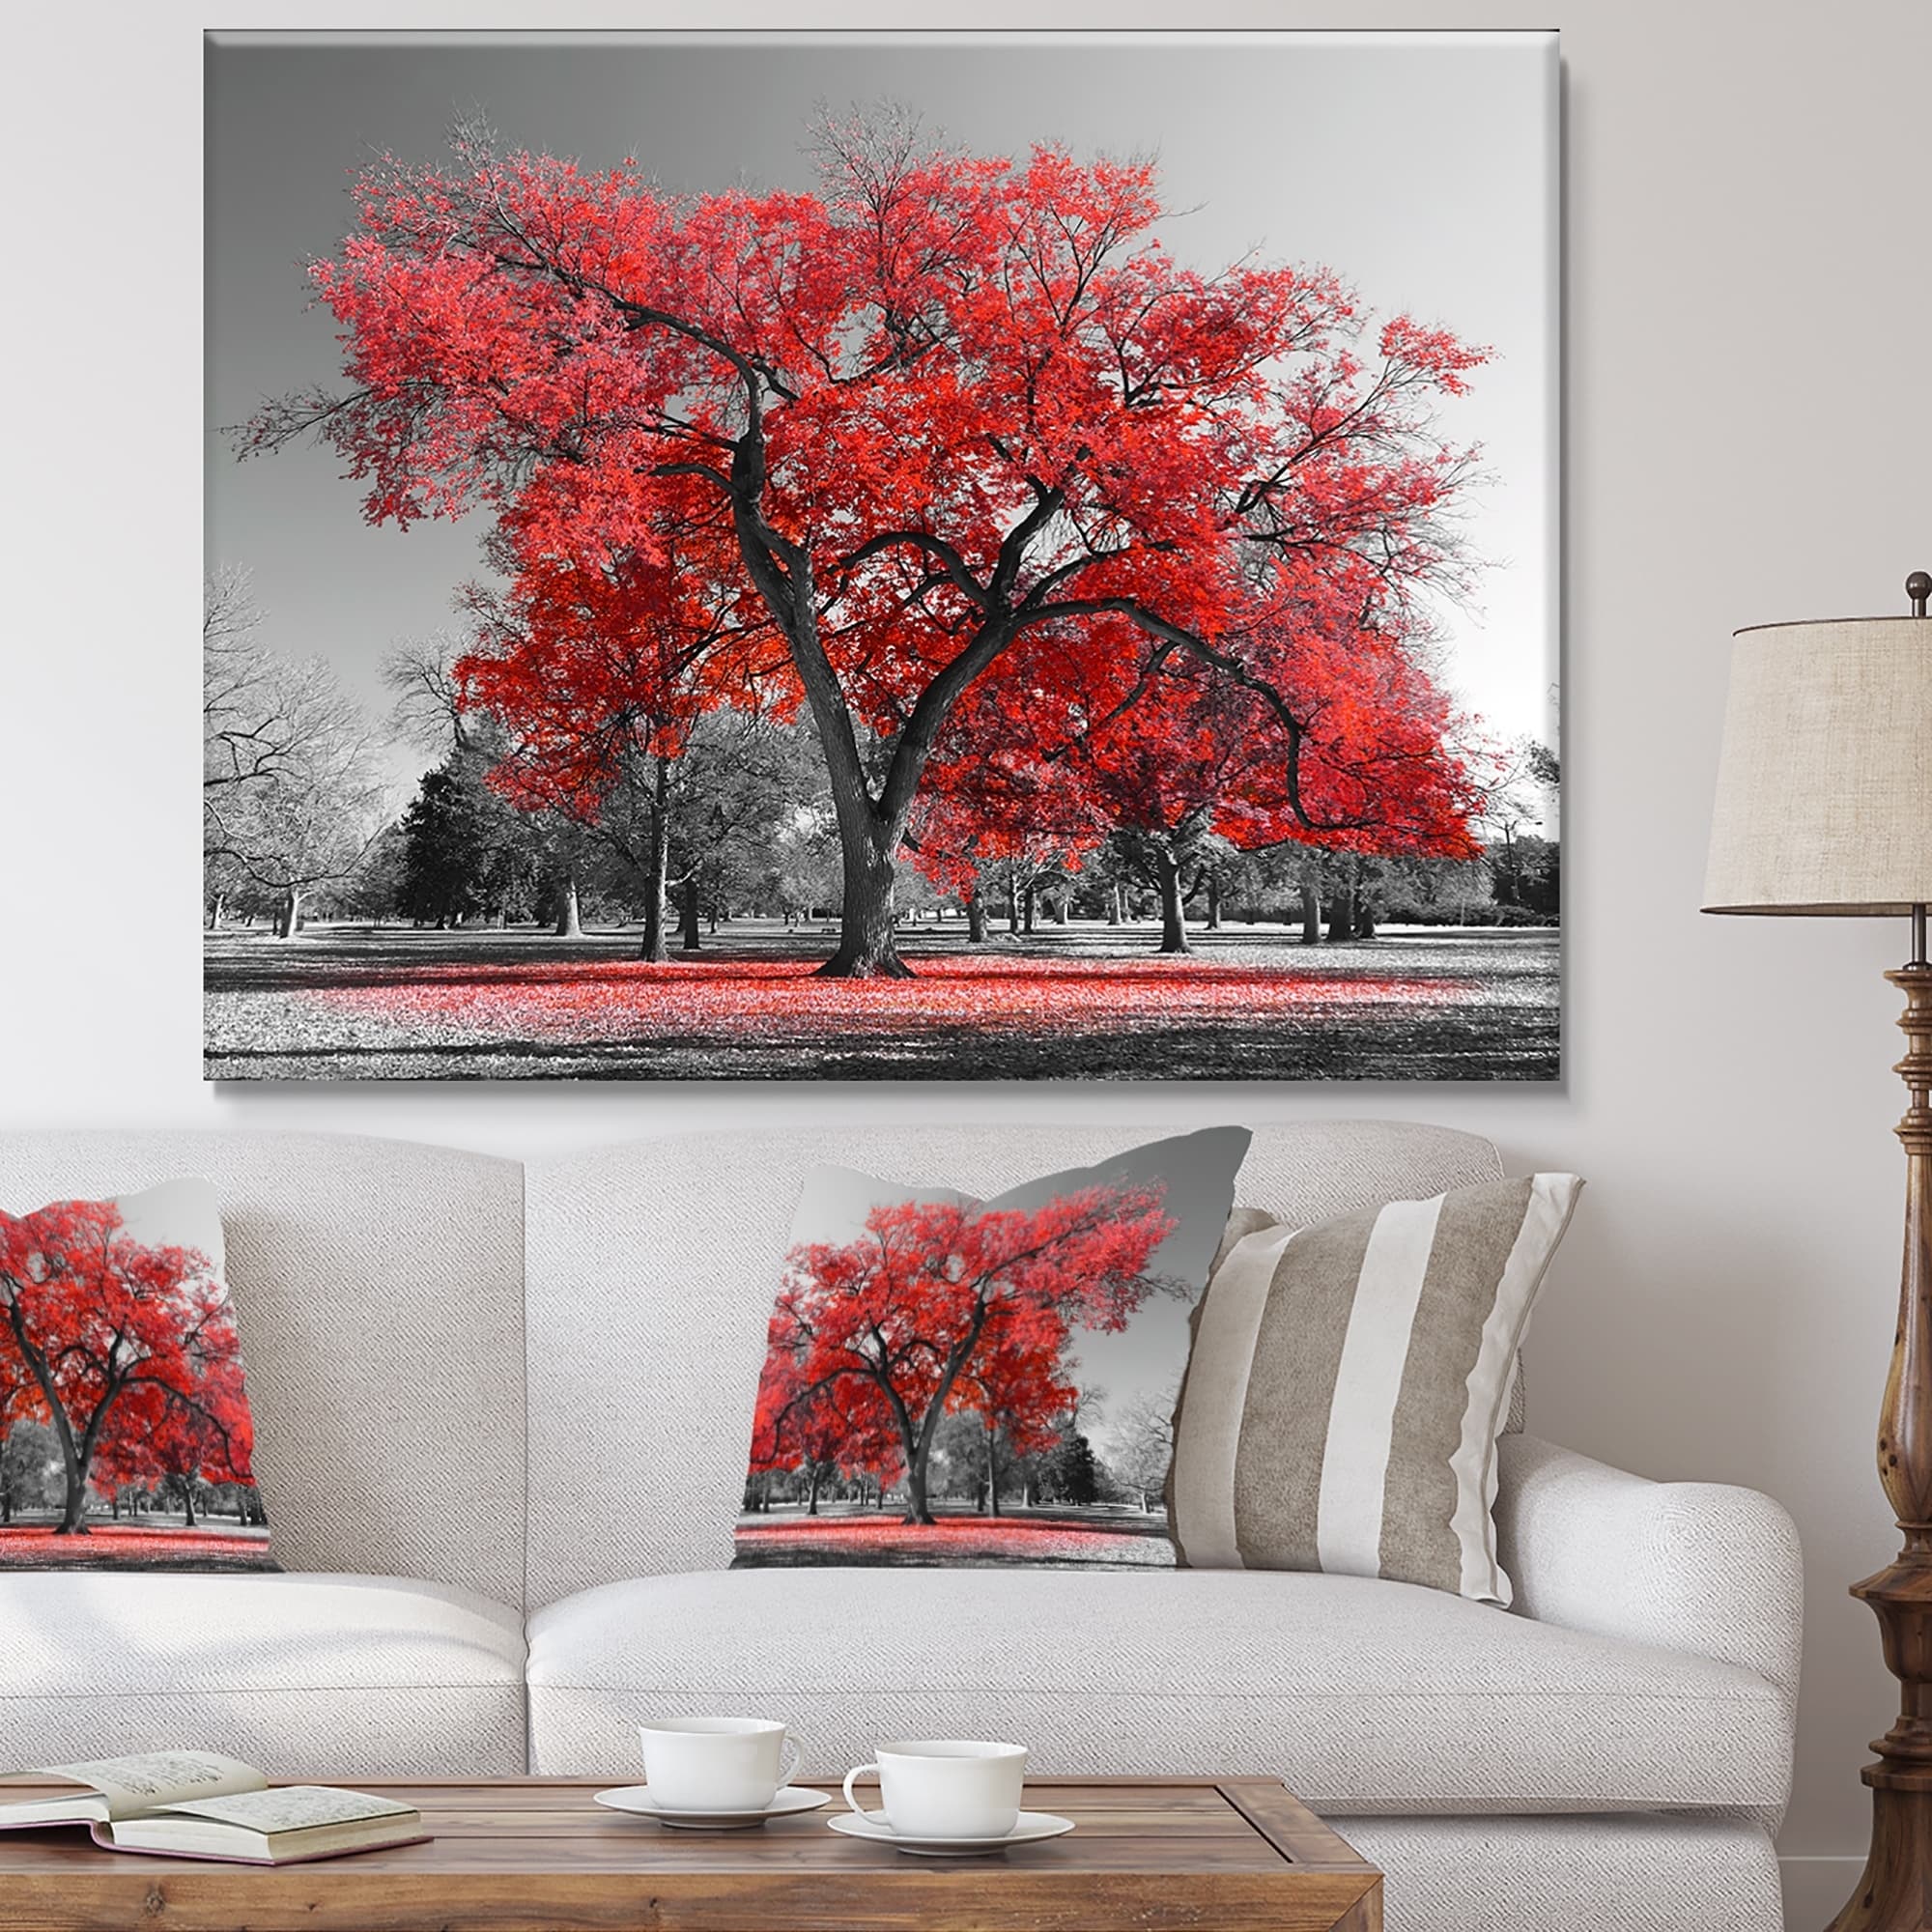 5 Piece Gray And Red Tree Canvas Wall Art Forest Painting For Bedroom Stretched And Framed Pictures For Living Room Mimbarschool Com Ng